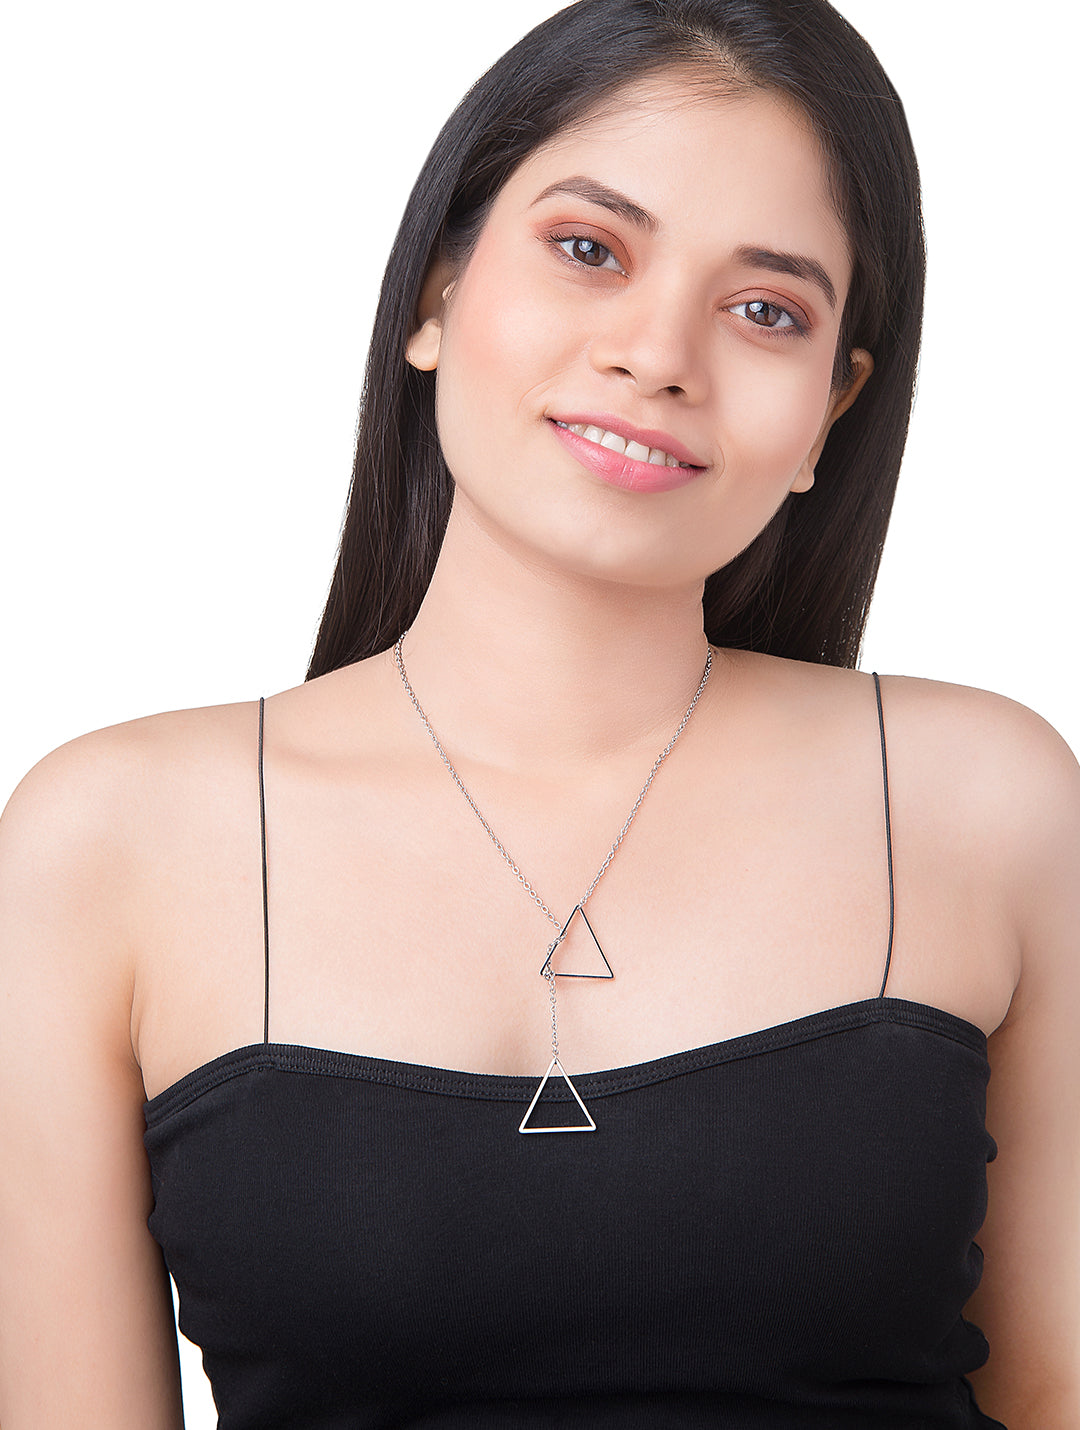 Silver Plated Stylish Designer Adjustable and Delicate Contemporary Geometric Pendent For Girls, Teens & Women (MD_2130)